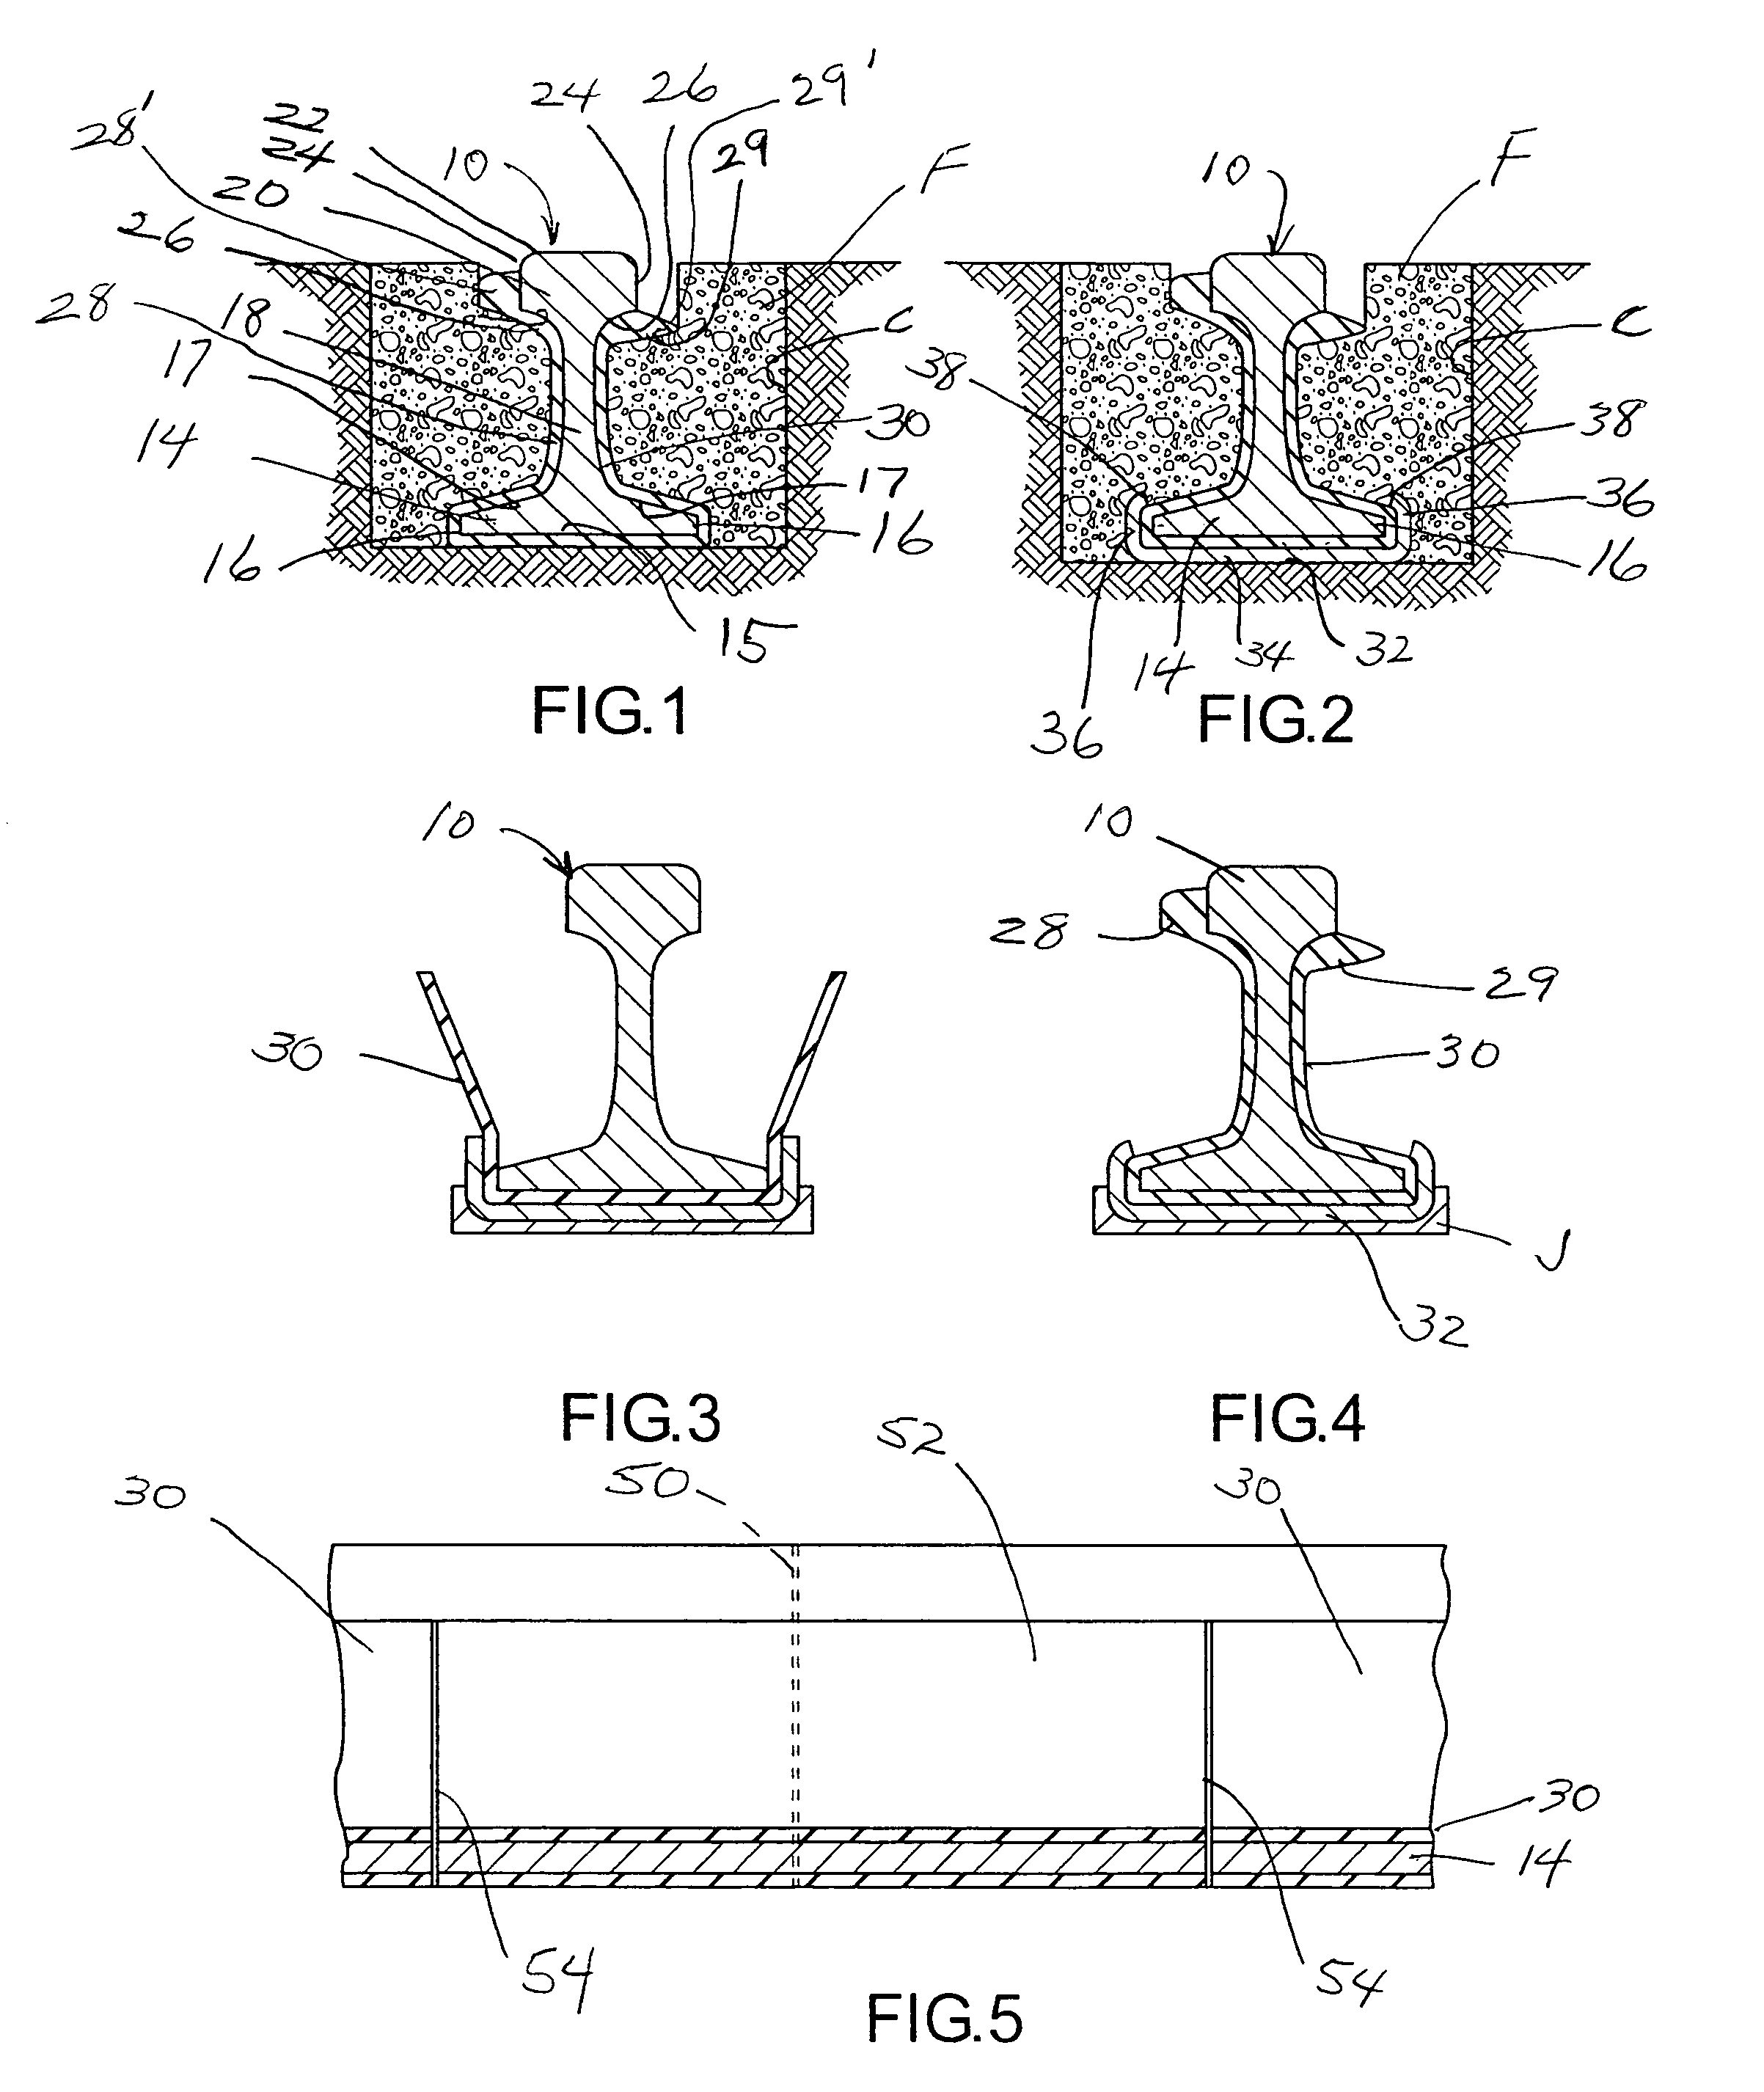 Insulated rail for electric transit systems and method of making same